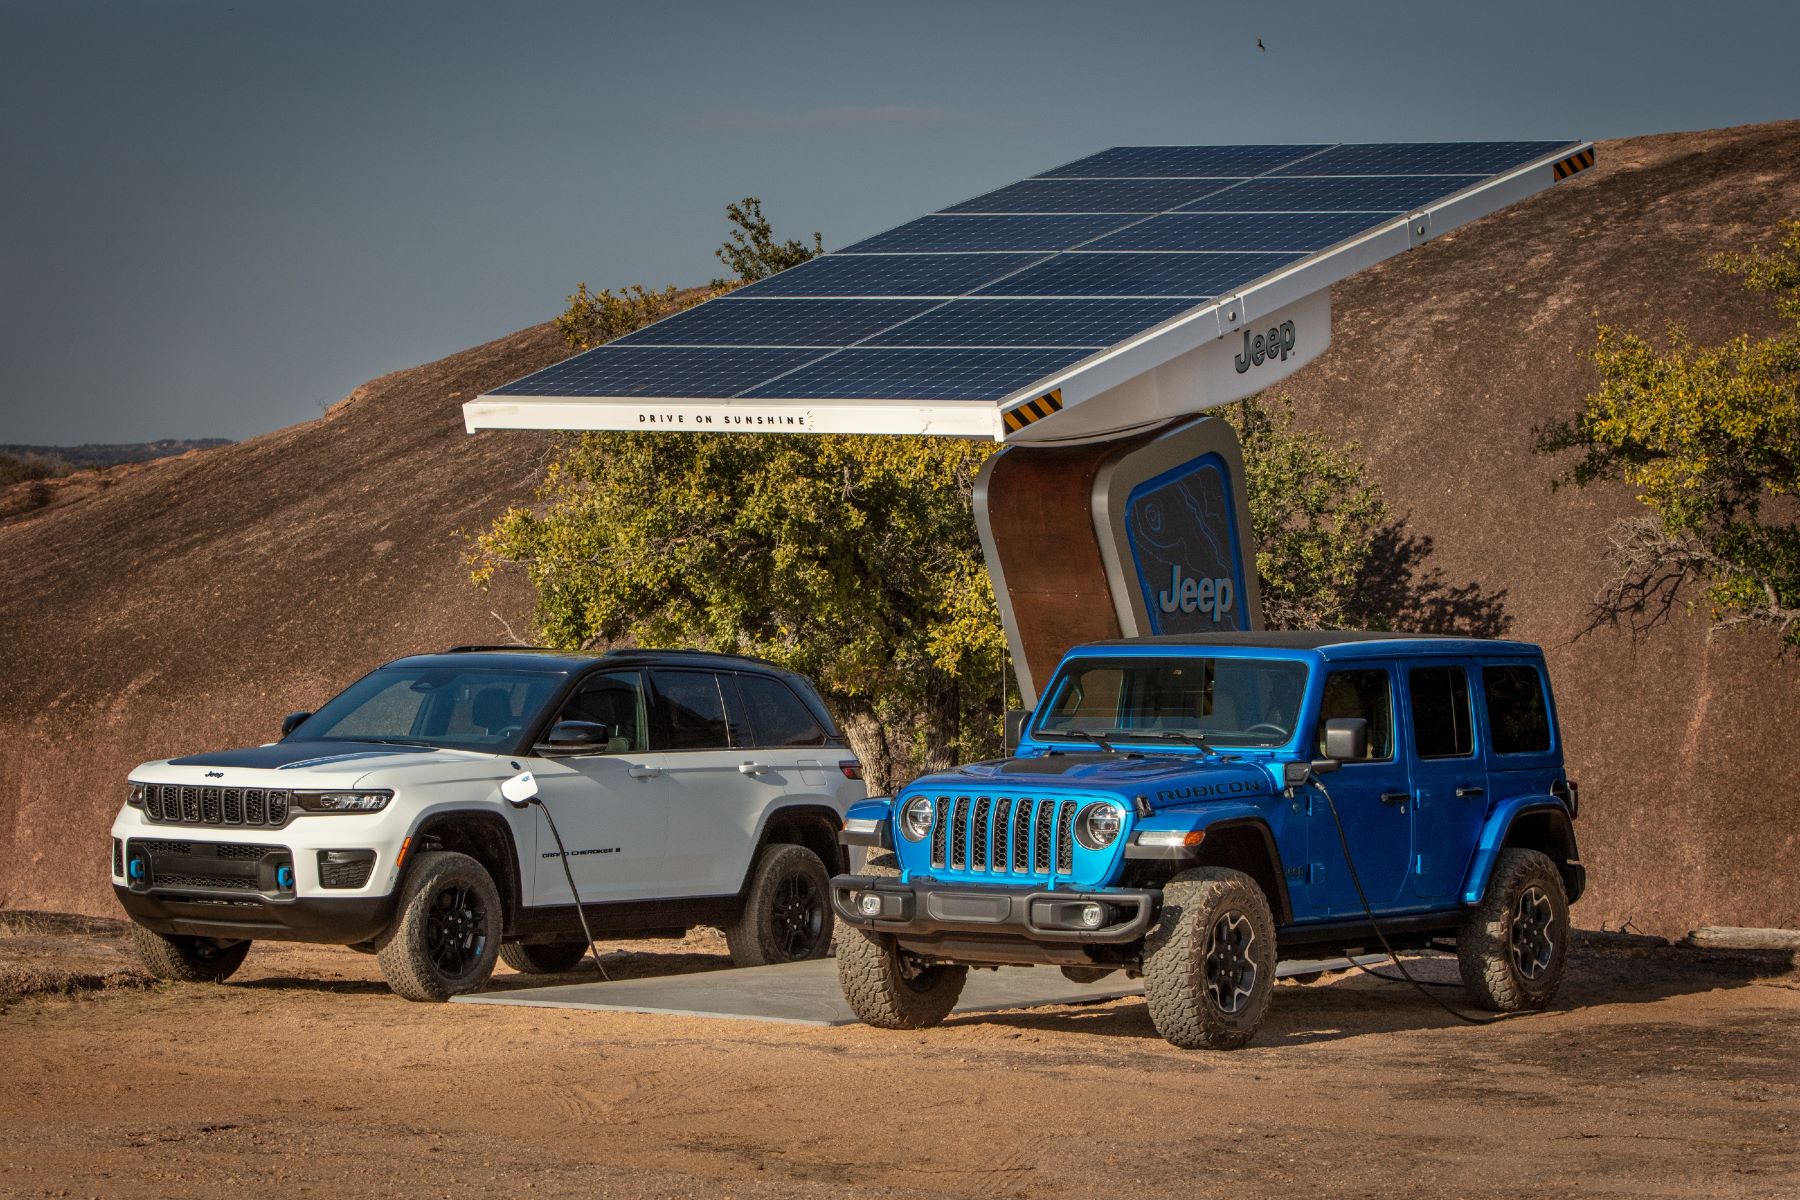 Jeep Grand Cherokee 4xe and Jeep Wrangler 4xe PHEVs plugged into a solar panel charging station